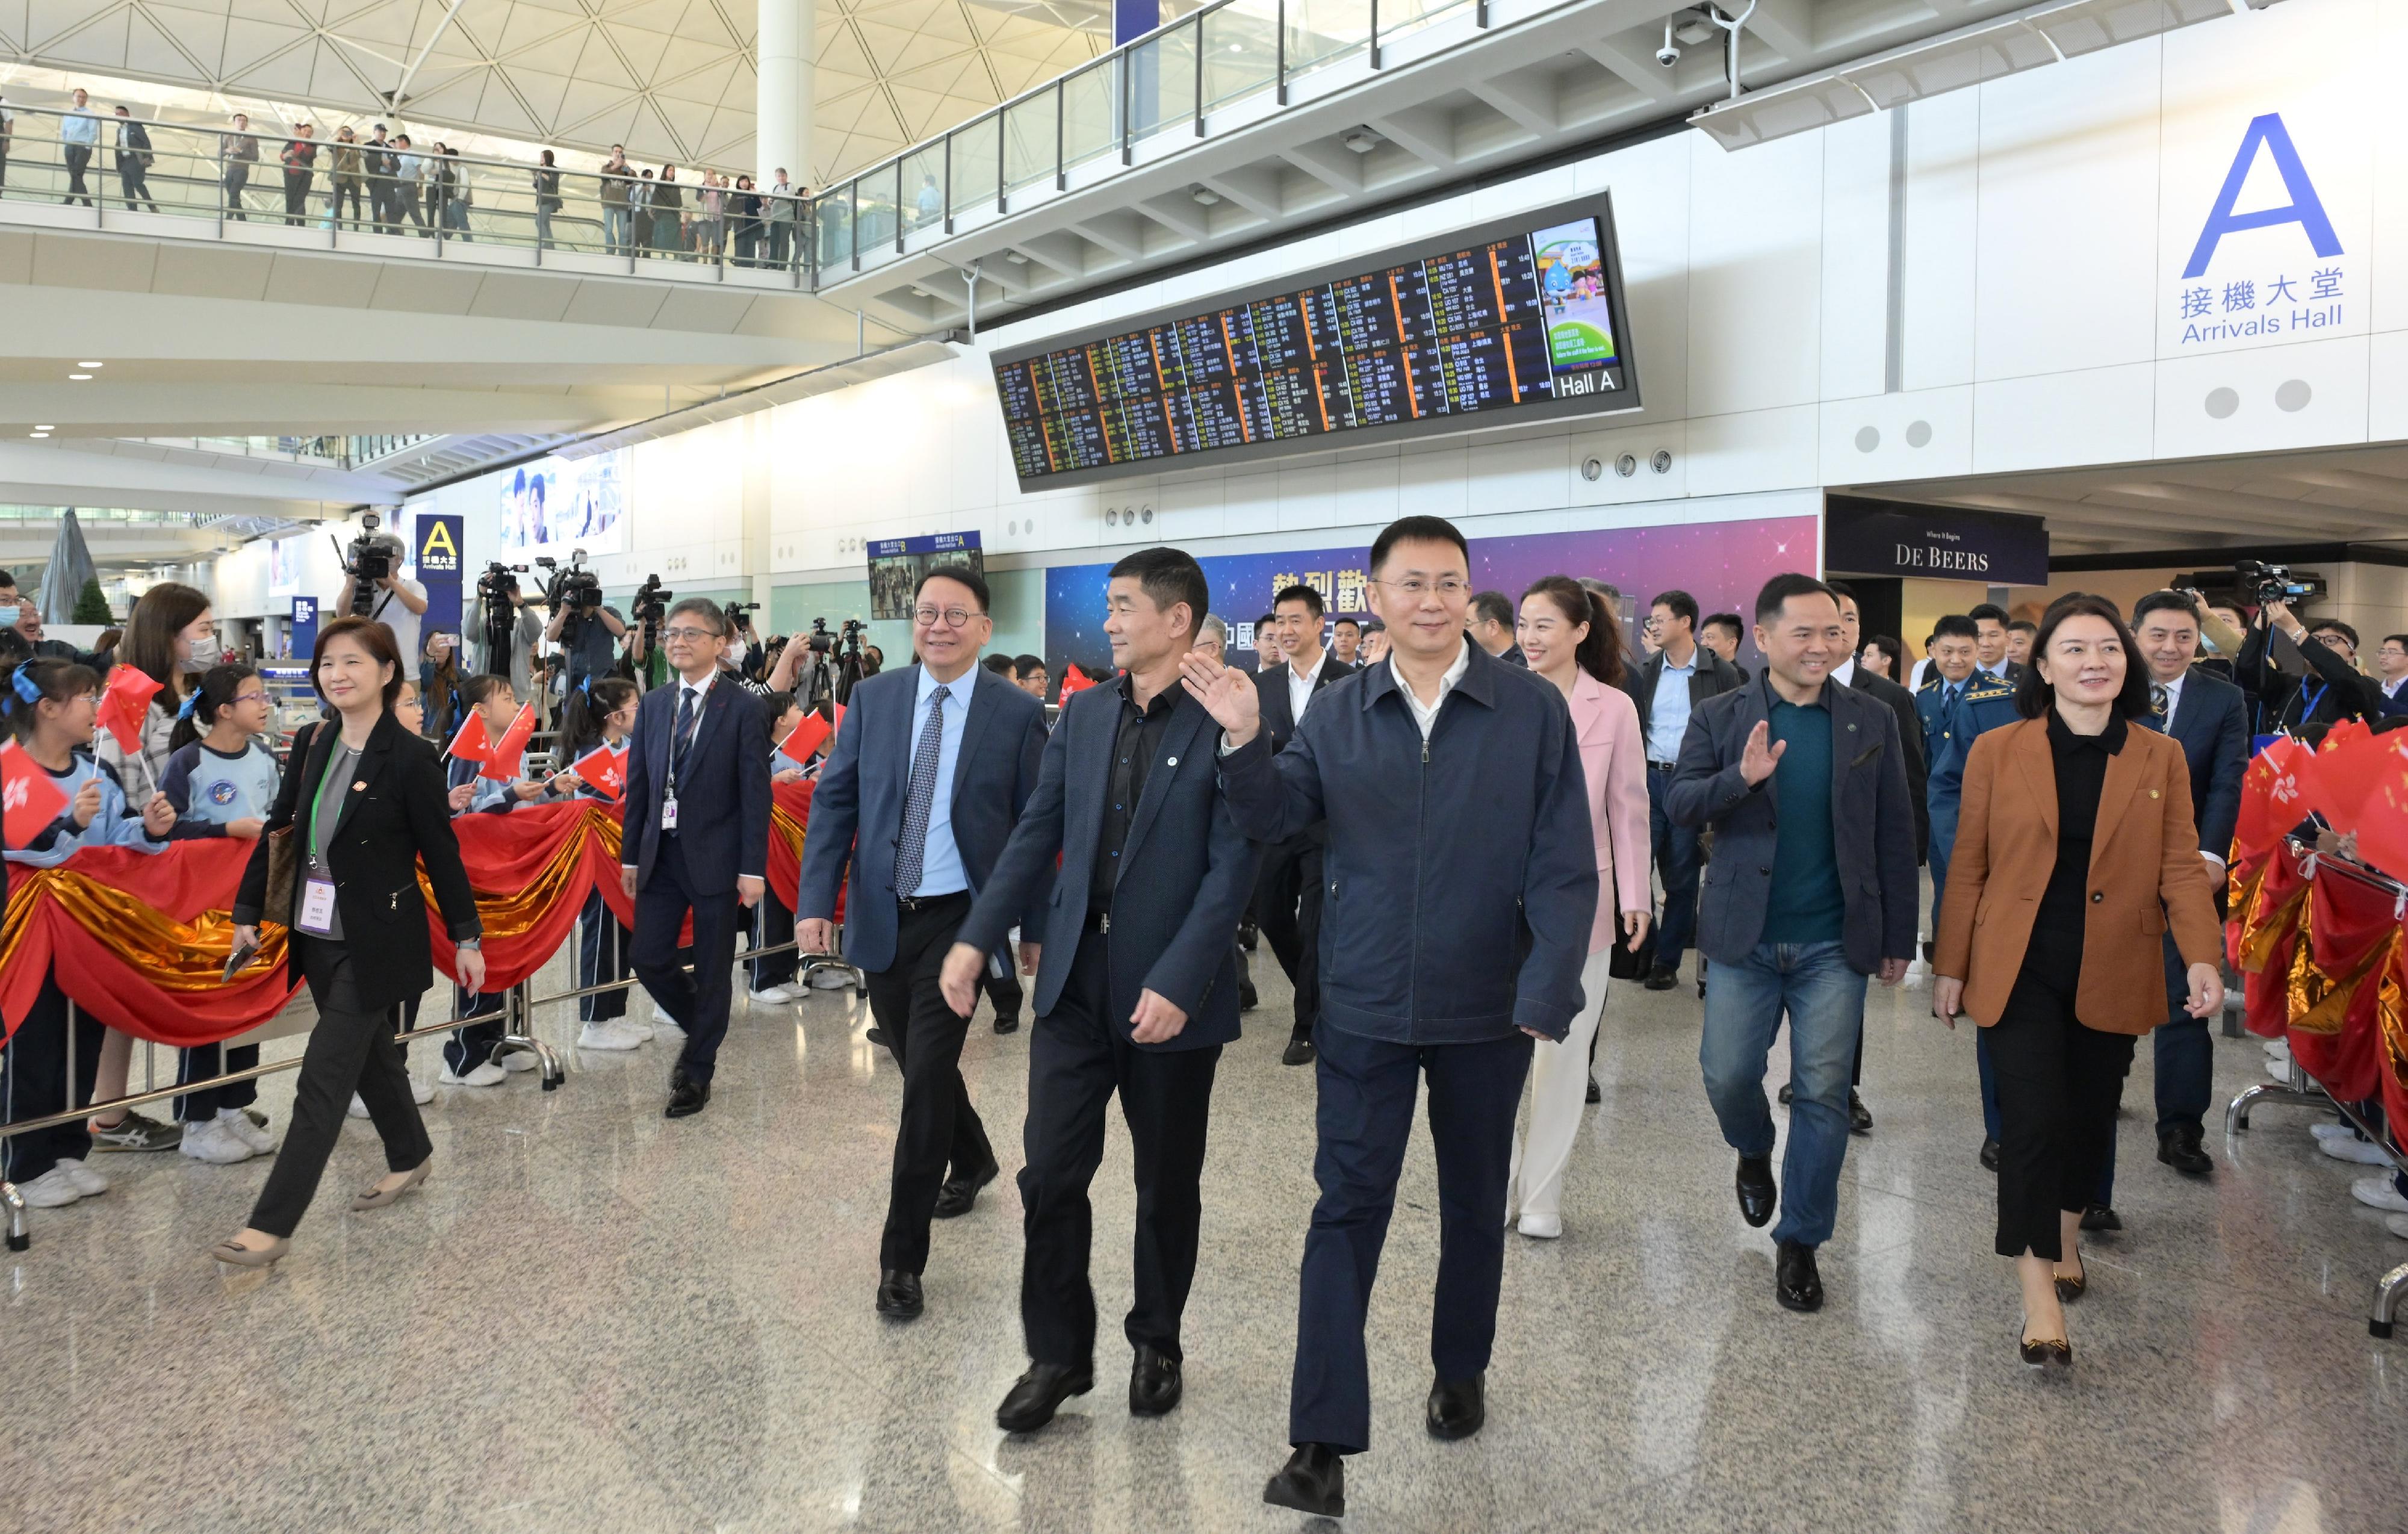 A China Manned Space delegation arrived in Hong Kong for a four-day visit today (November 28). Photo shows the Chief Secretary for Administration, Mr Chan Kwok-ki (third left), greeting the delegation members at Hong Kong International Airport.